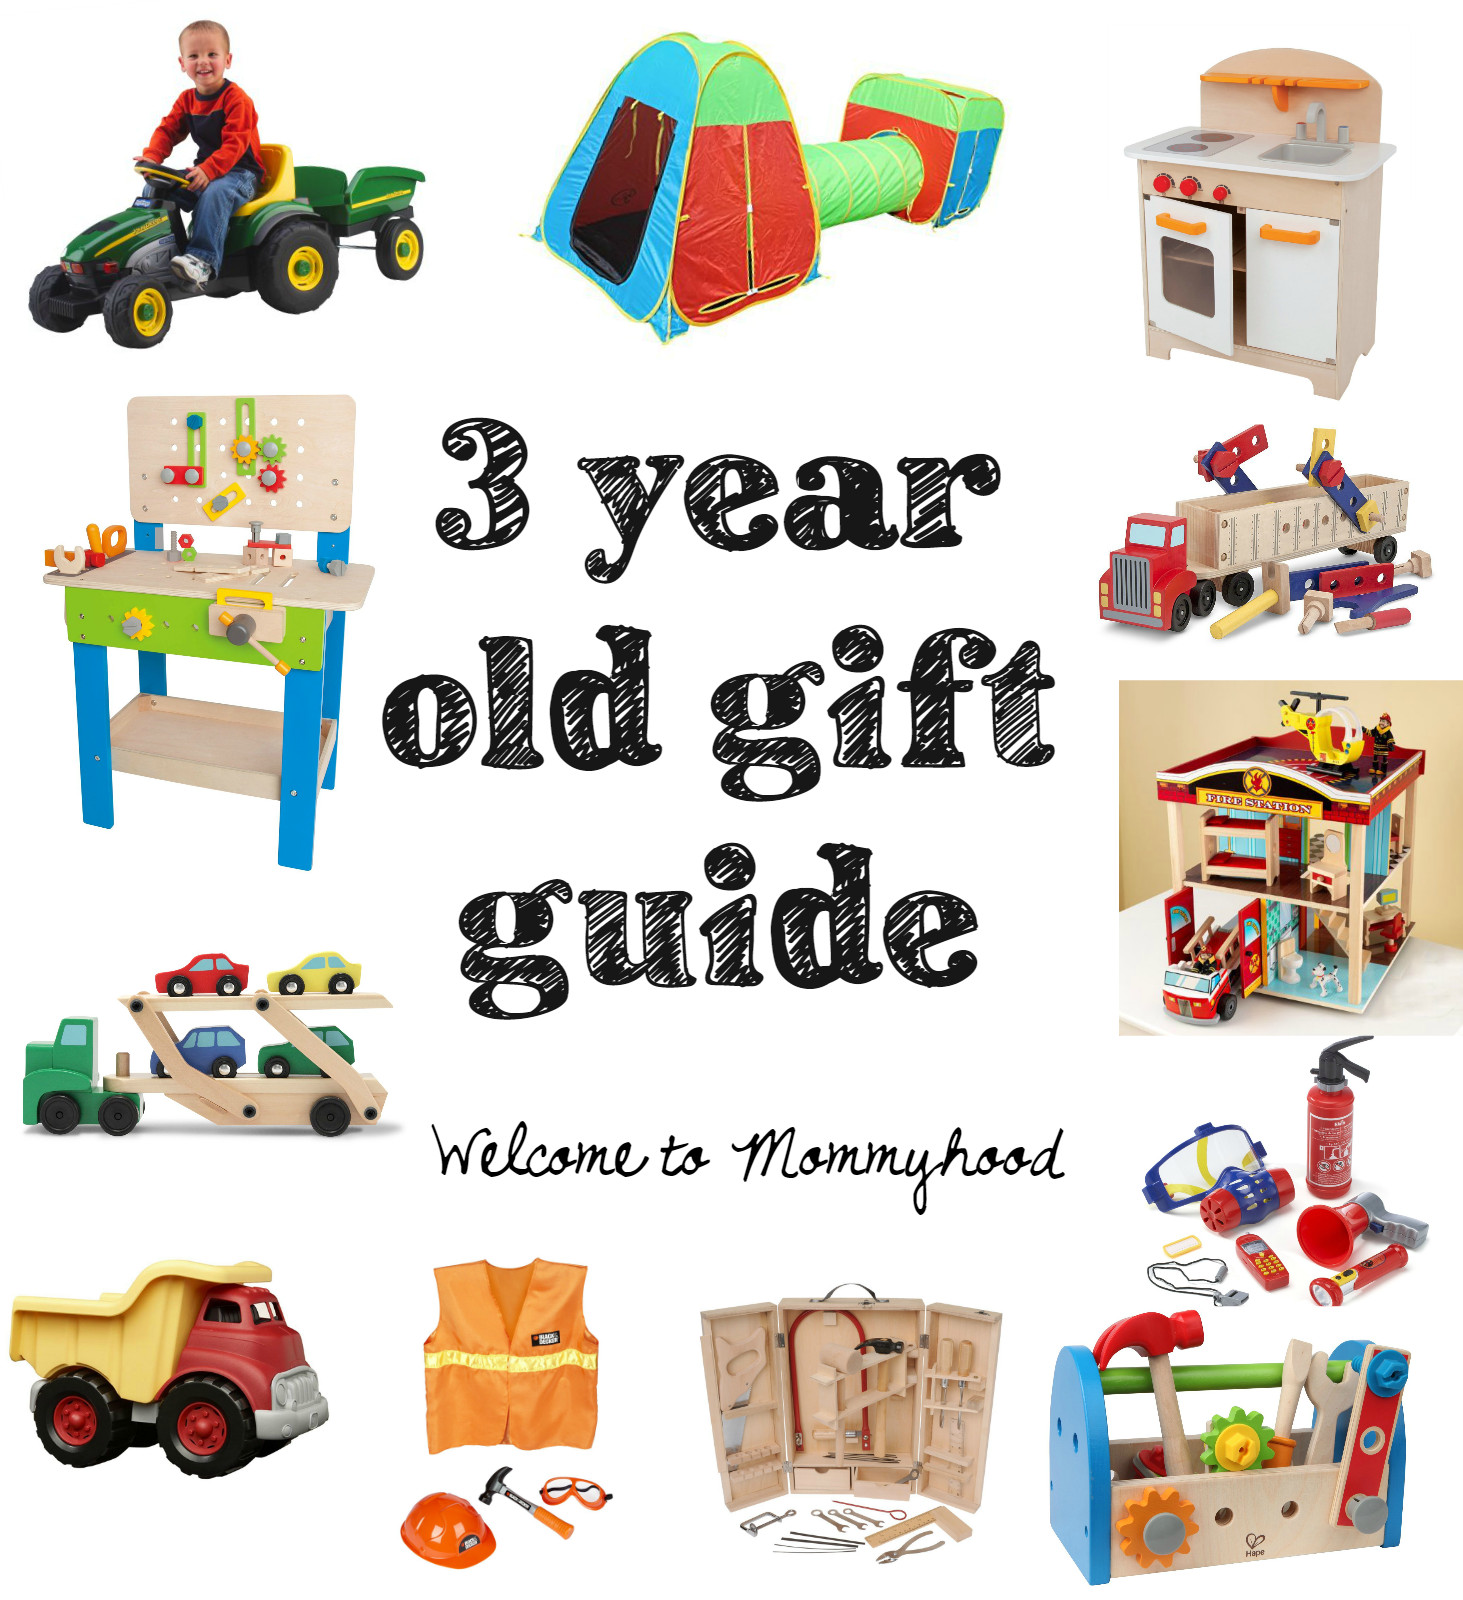 3 Year Old Birthday Gifts
 Wel e to Mommyhood Birthday t ideas for a 3 year old